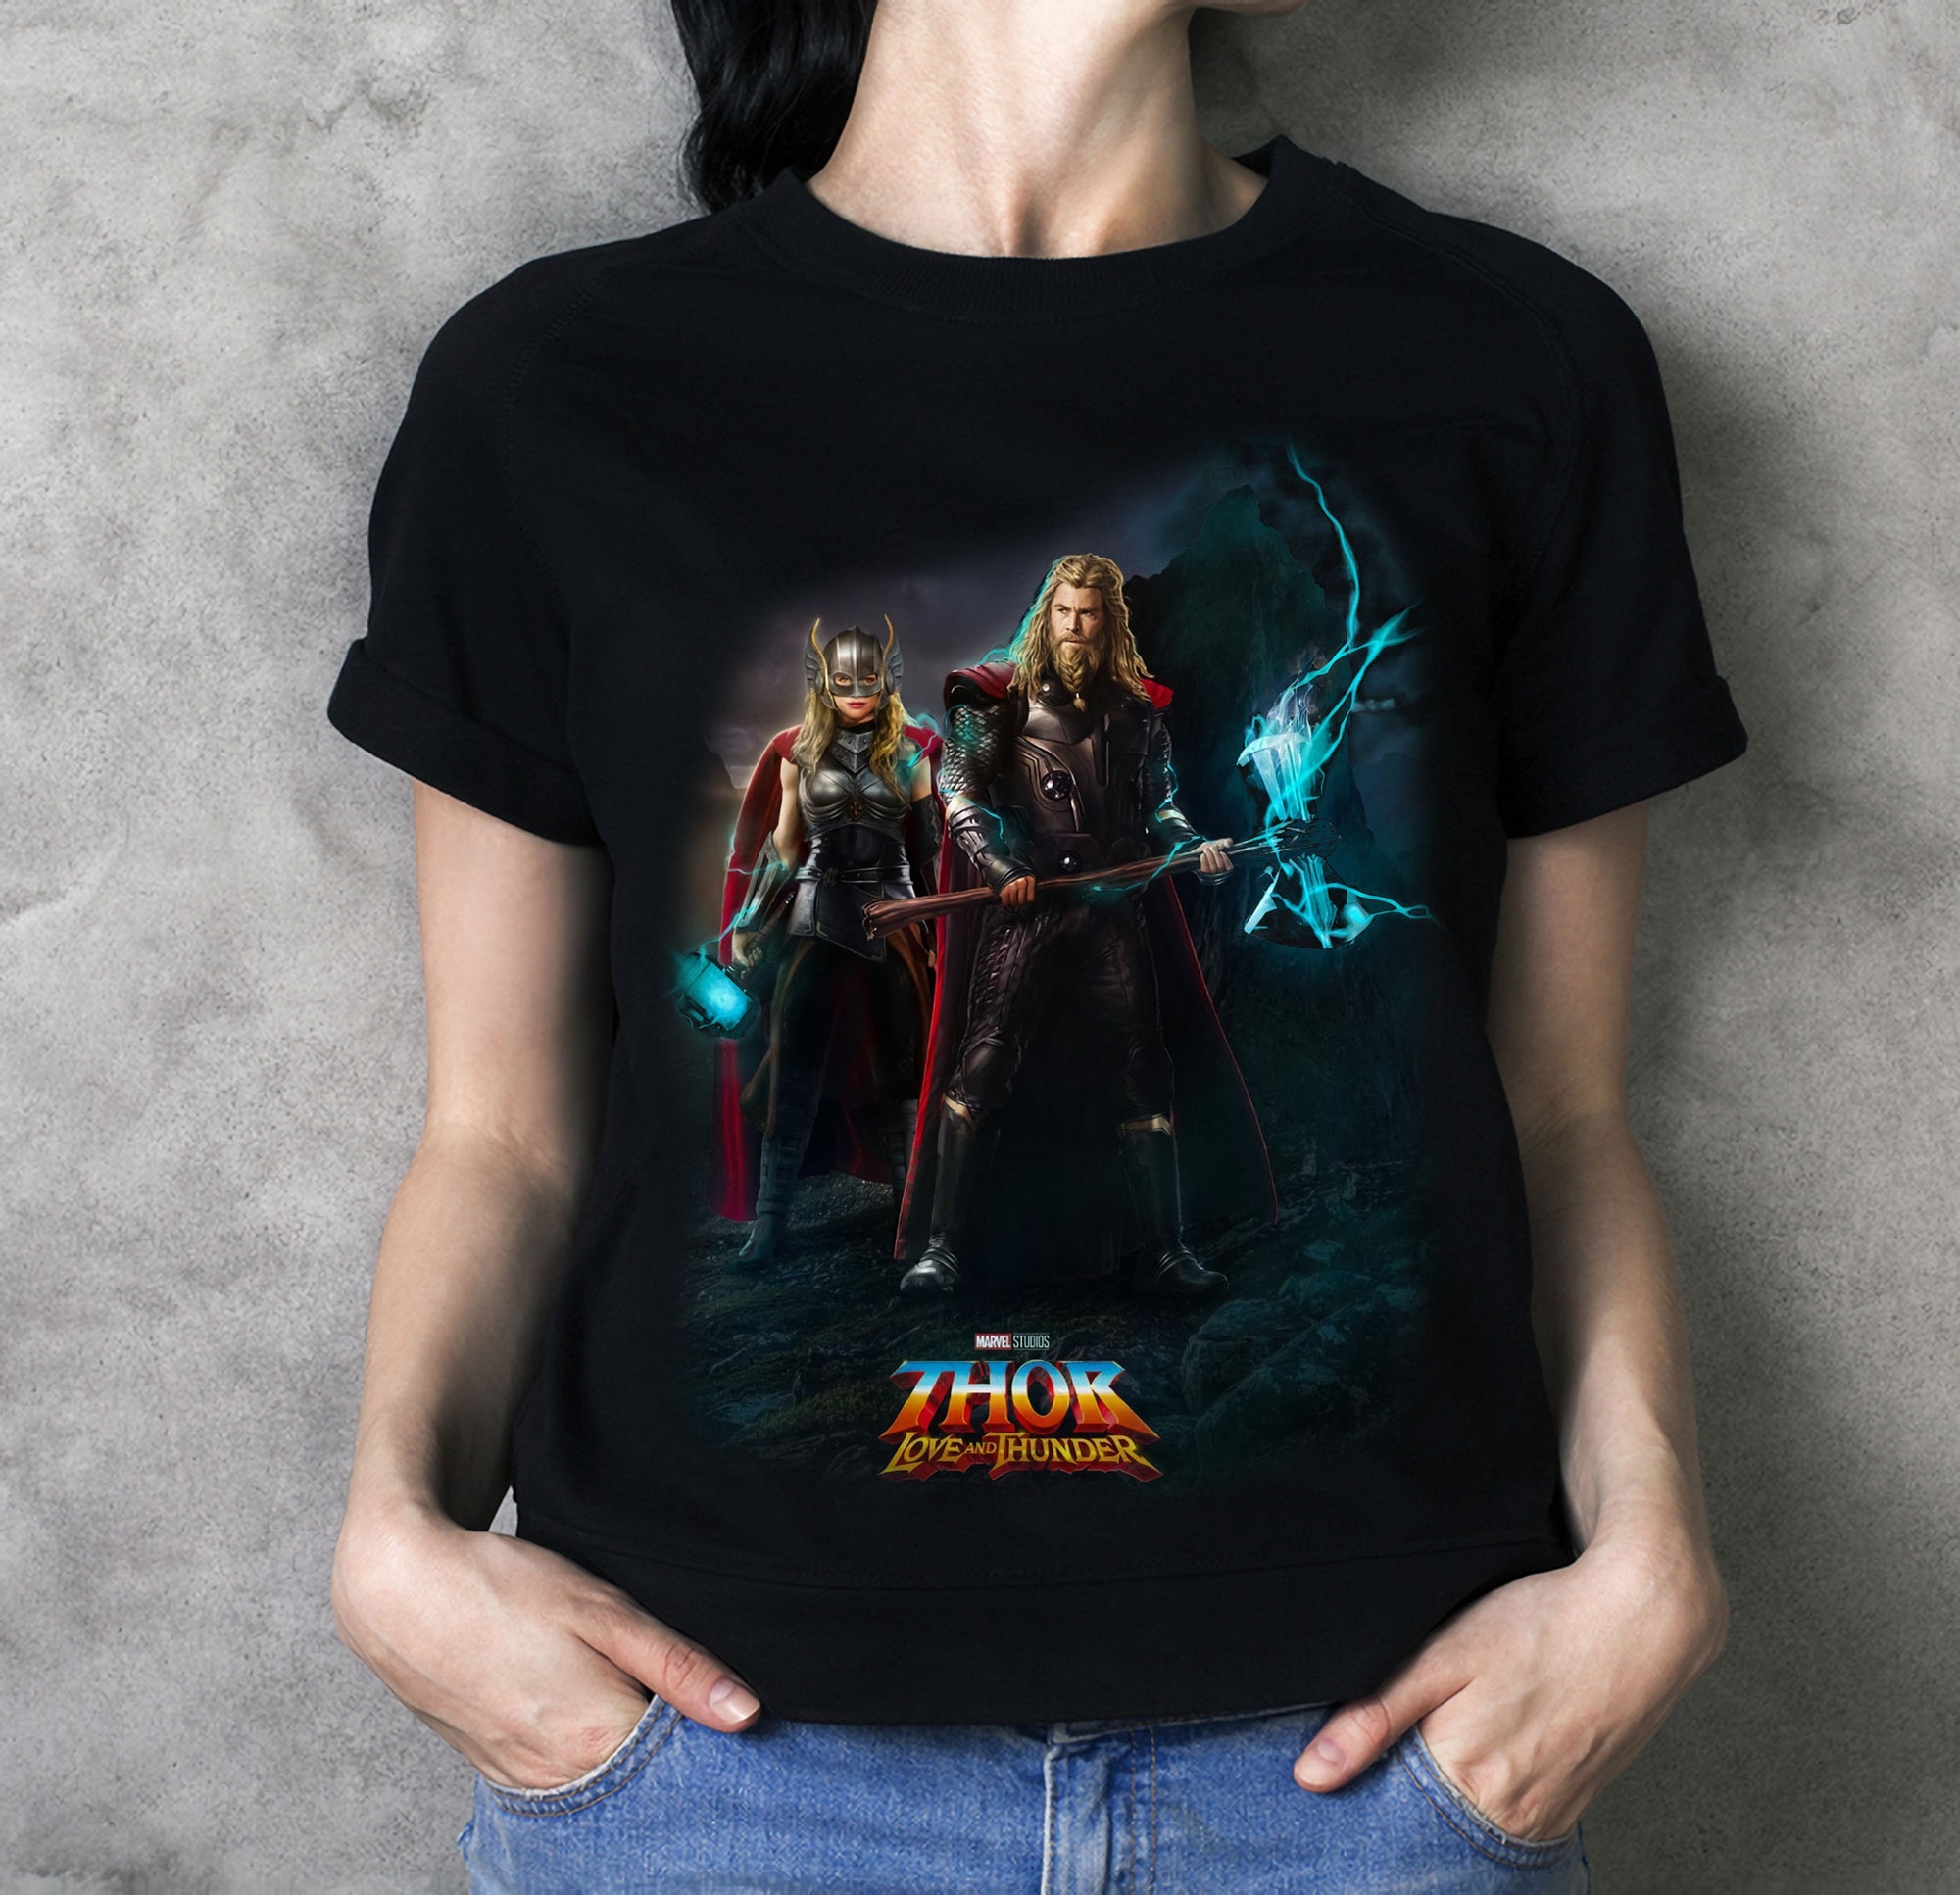 Thor- Love and Thunder 3D Shirt, Mighty Thor Jane Foster T-Shirt